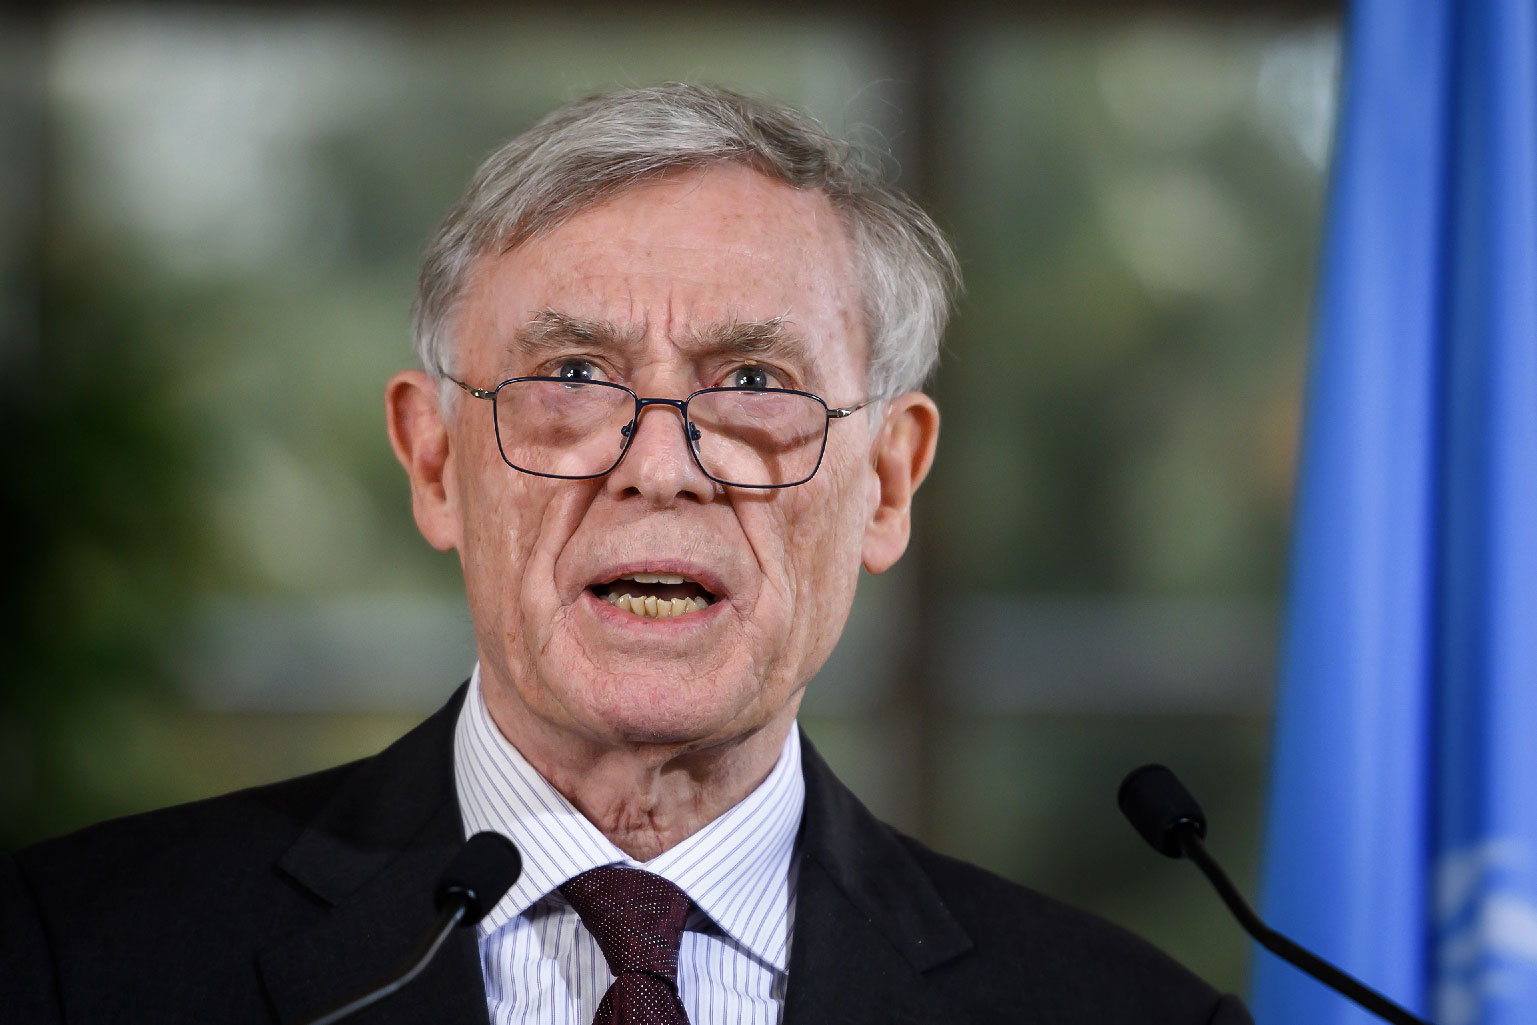 Envoy of the UN Secretary-General for Western Sahara Horst Kohler addresses the media following a two-day round of talks on ending the Western Sahara conflict at the United Nations offices in Geneva on March 22, 2019.